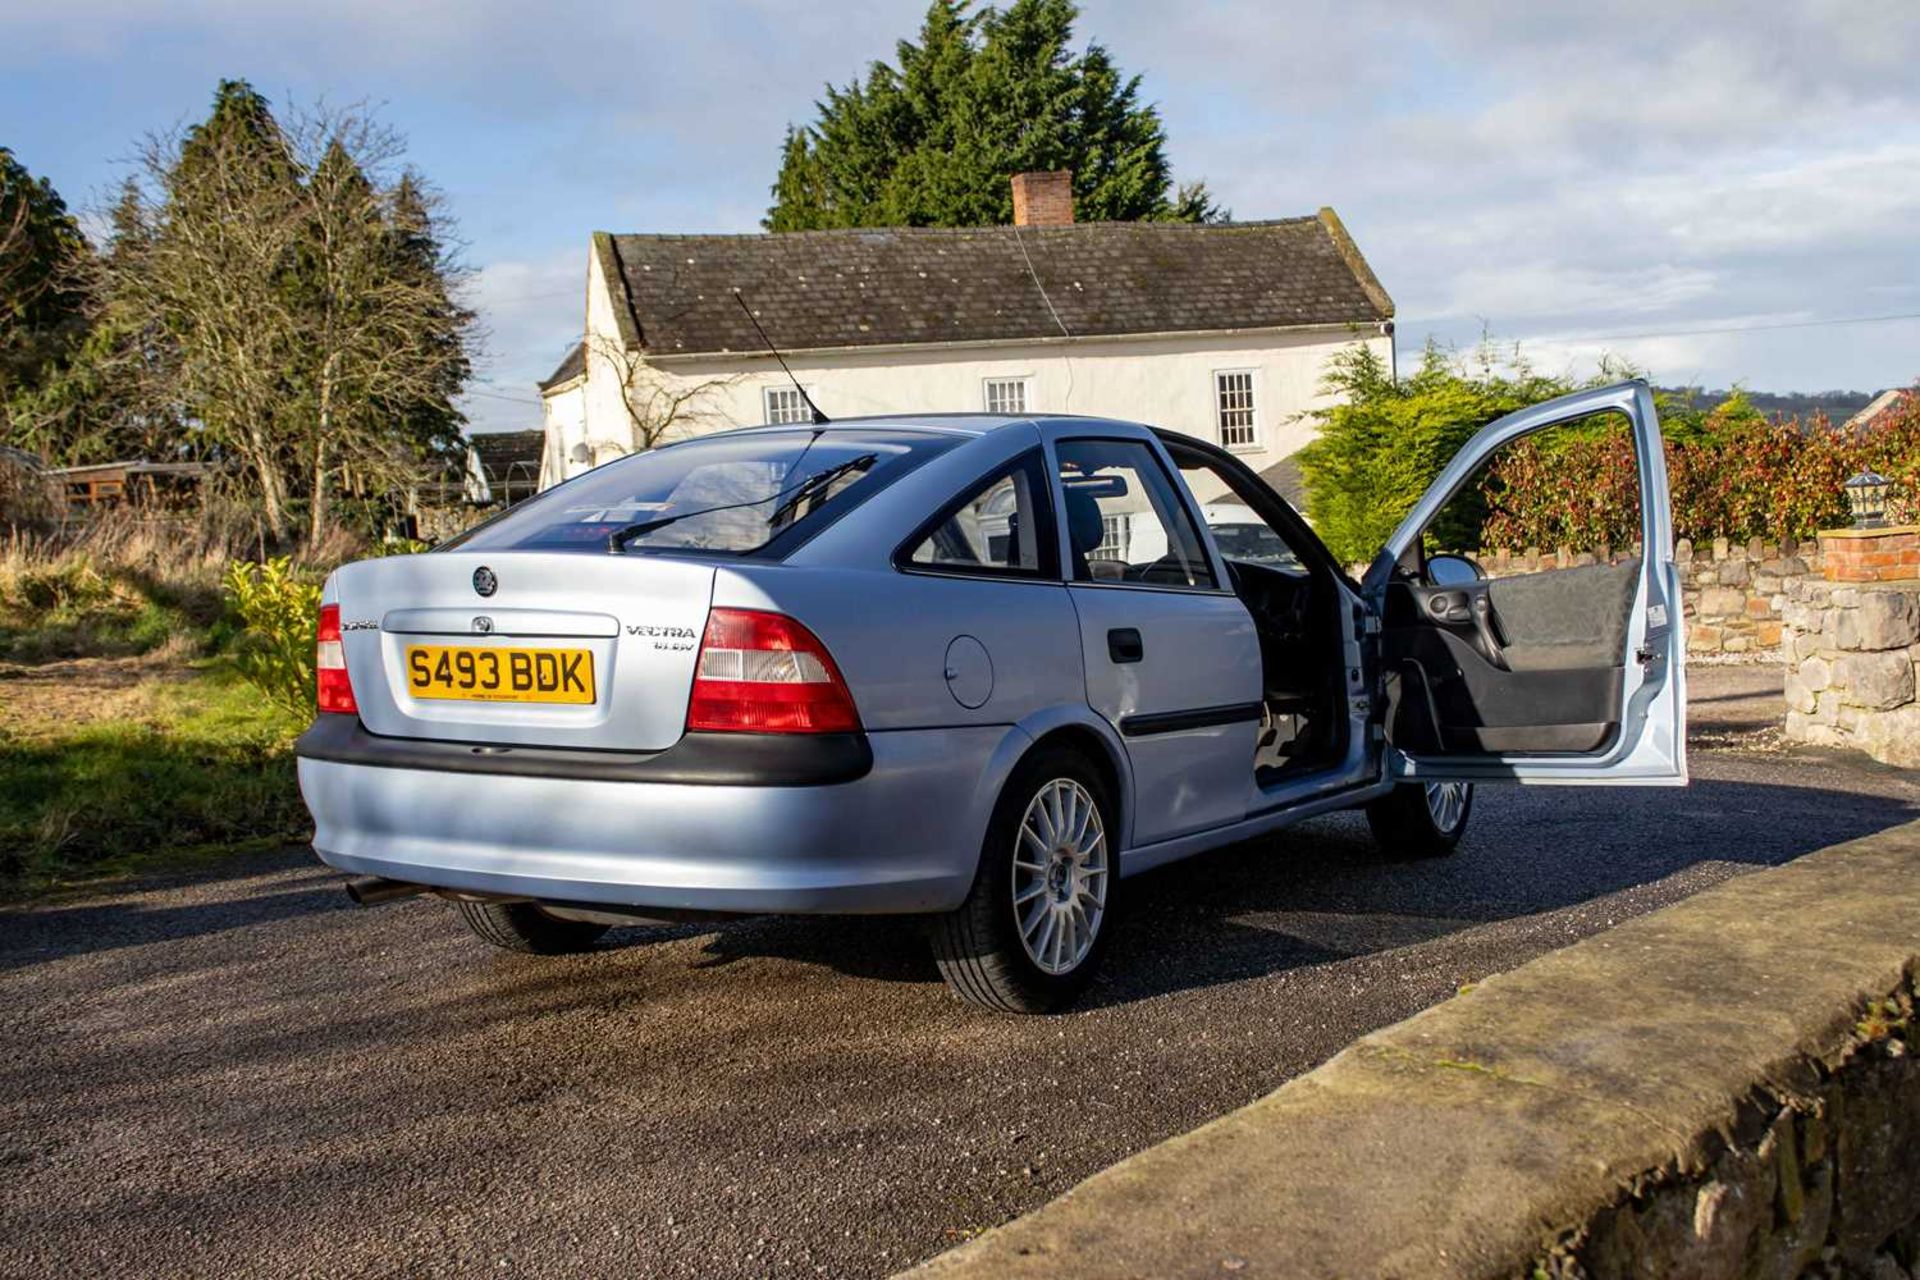 1998 Vauxhall Vectra 1.6 Envoy Automatic transmission and only 25,000 miles from new ***NO RESERVE** - Image 11 of 93